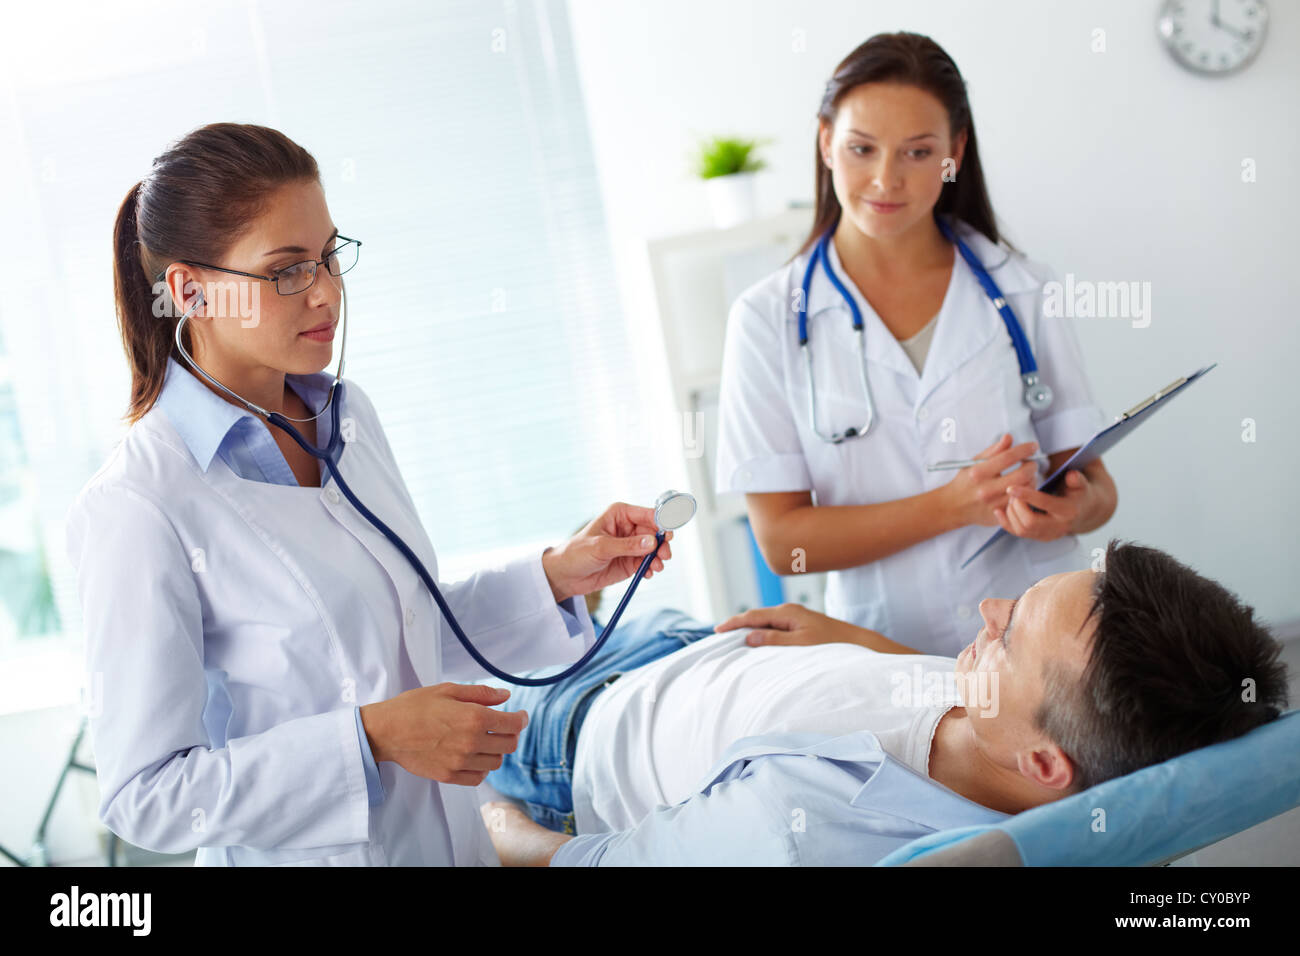 Portrait of two female doctors looking at patient during medical treatment in hospital Stock Photo